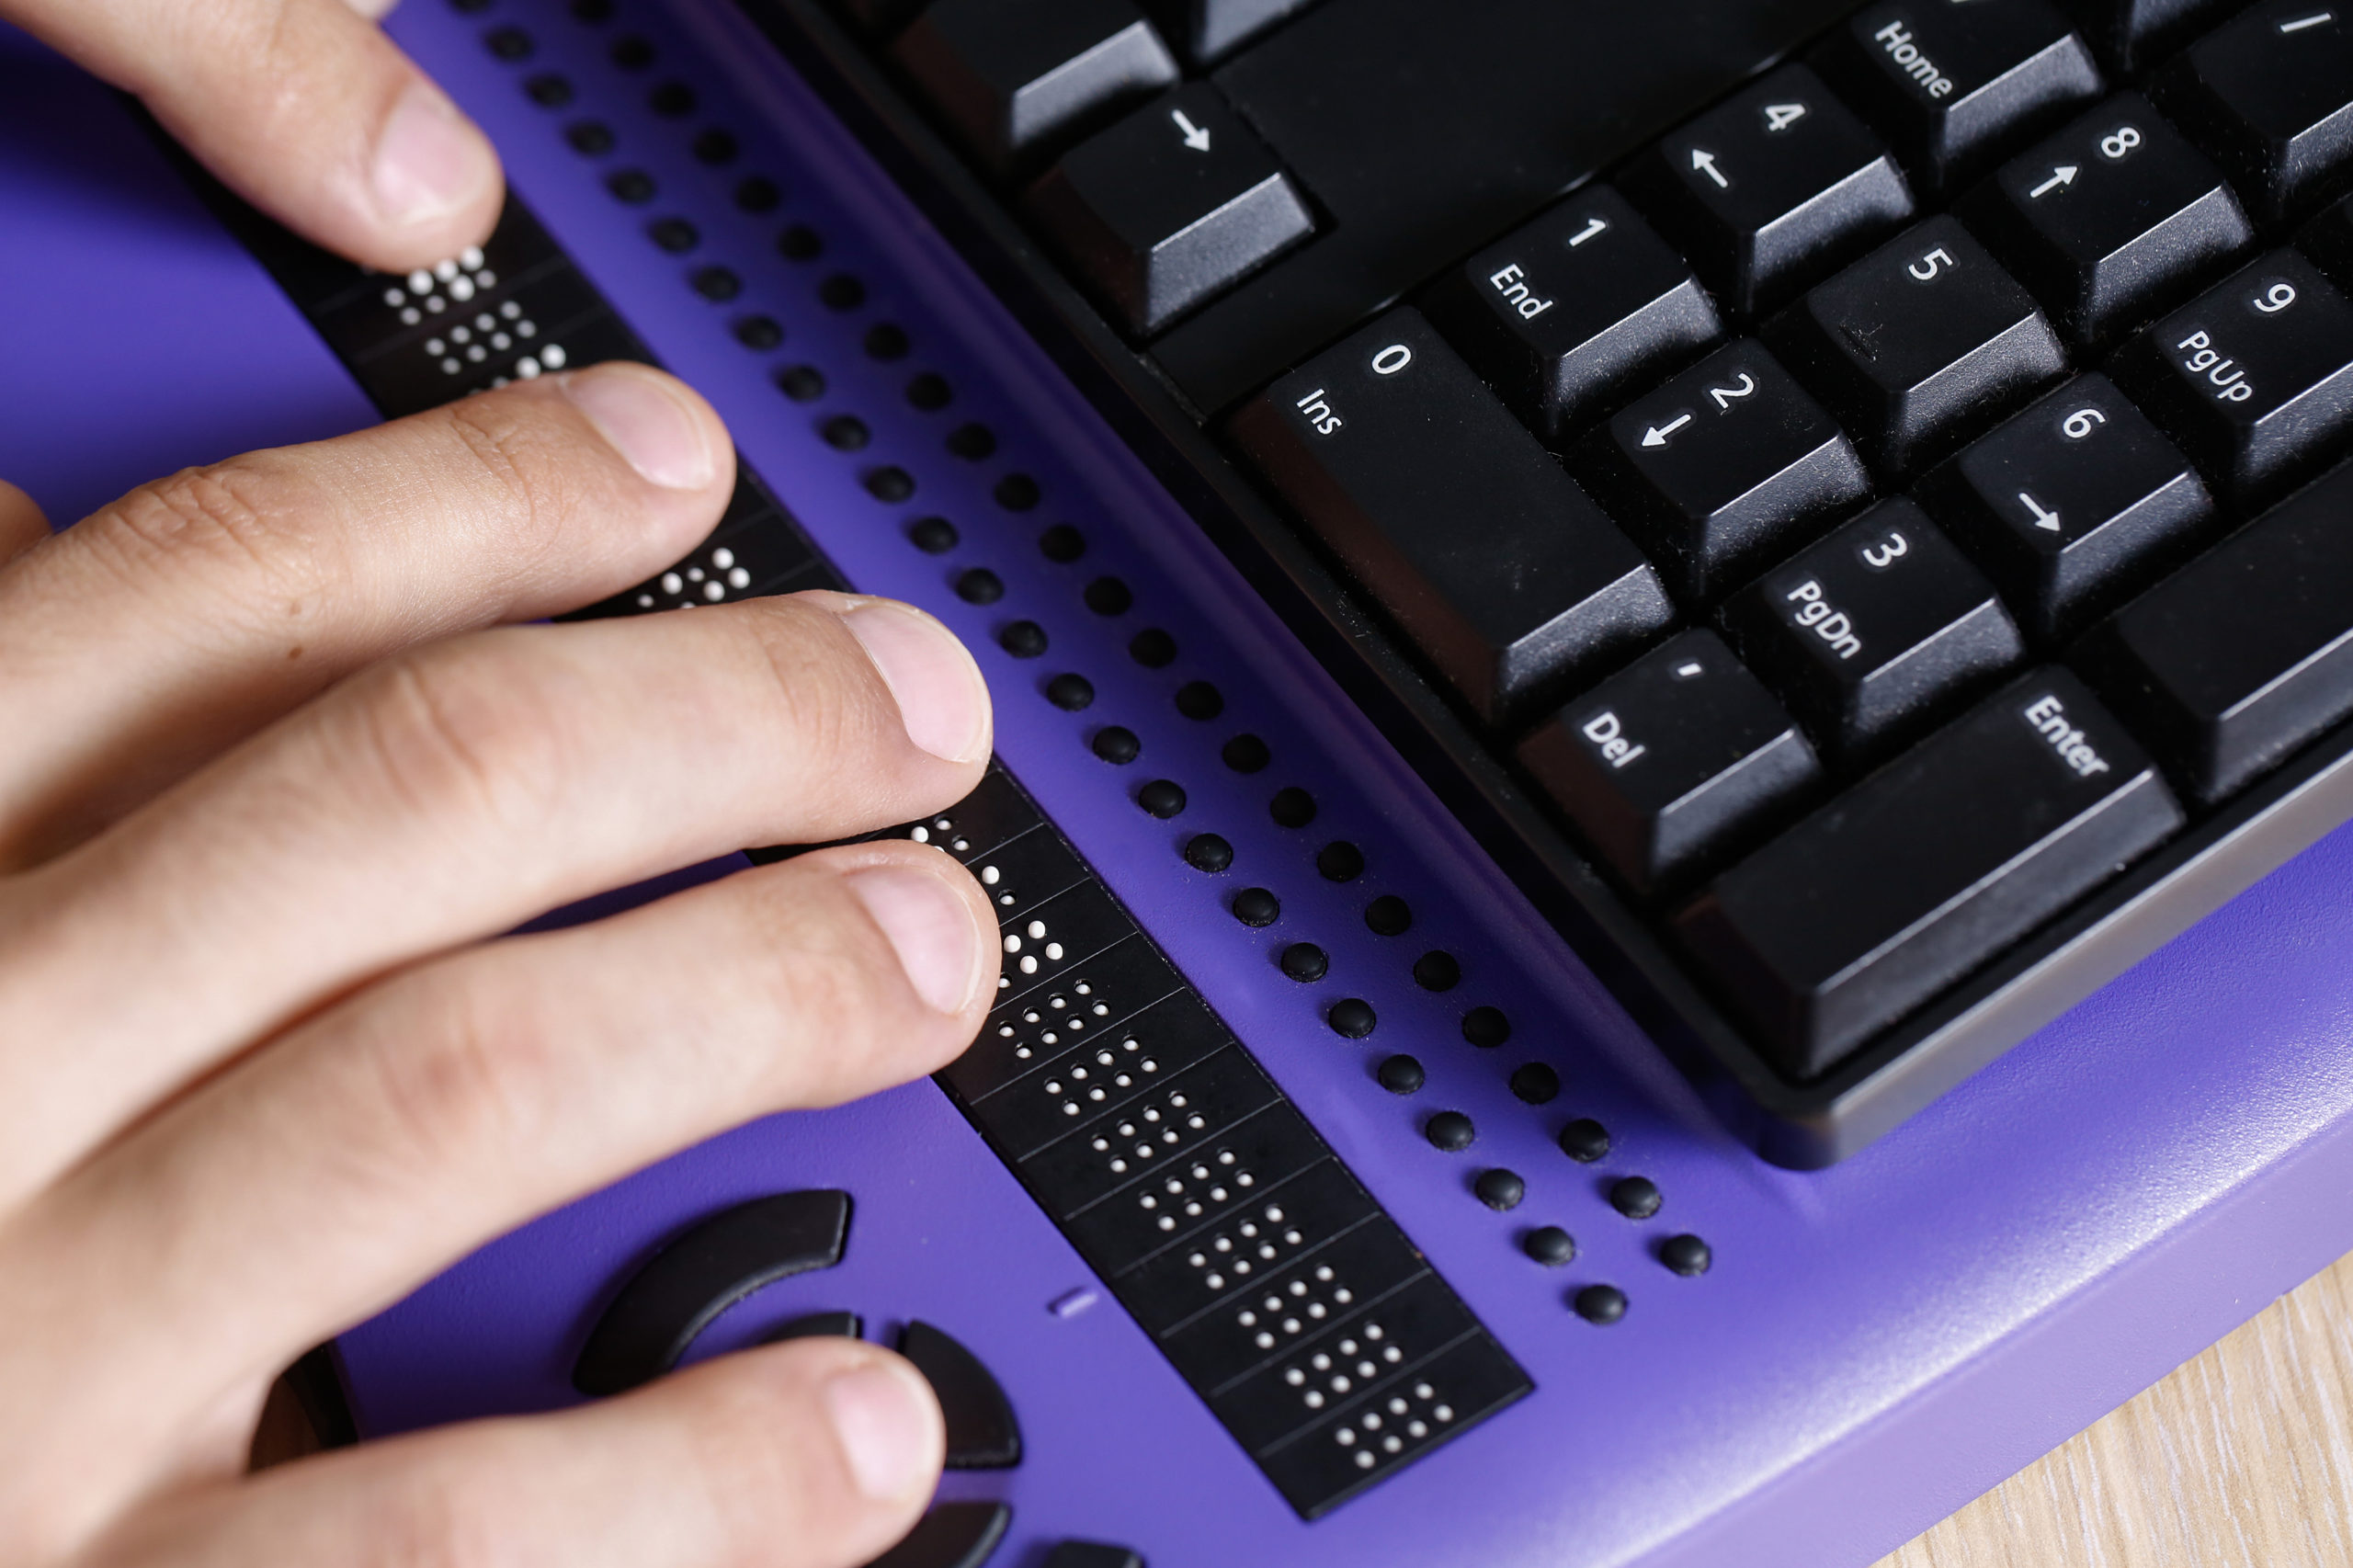 blind person using a computer with braille keyboard